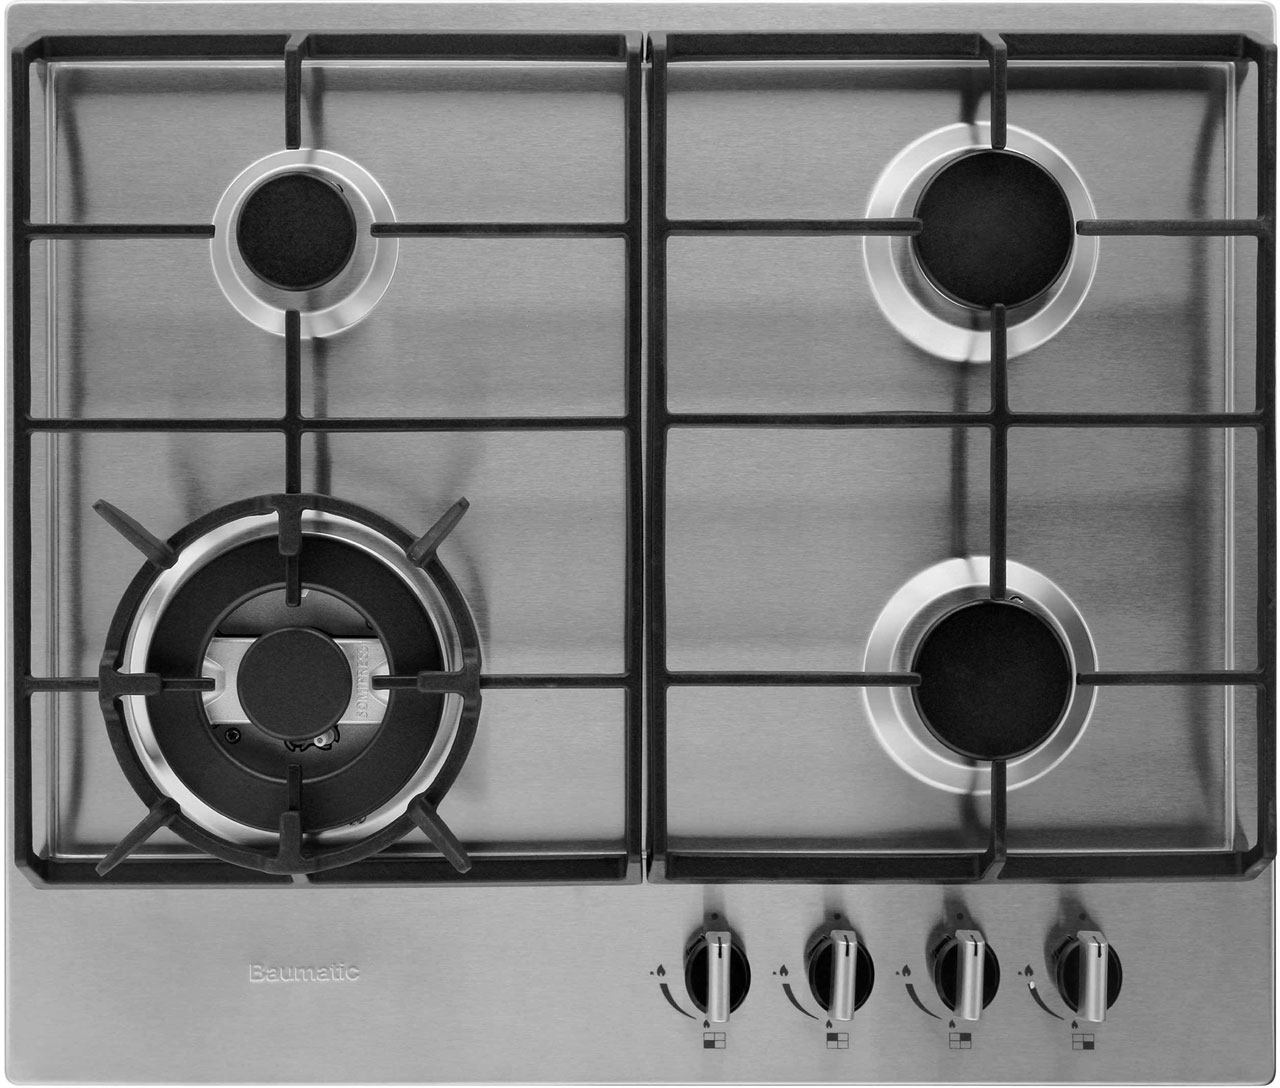 Small gas hob cleaned by Ultra Clean Ovens from £20